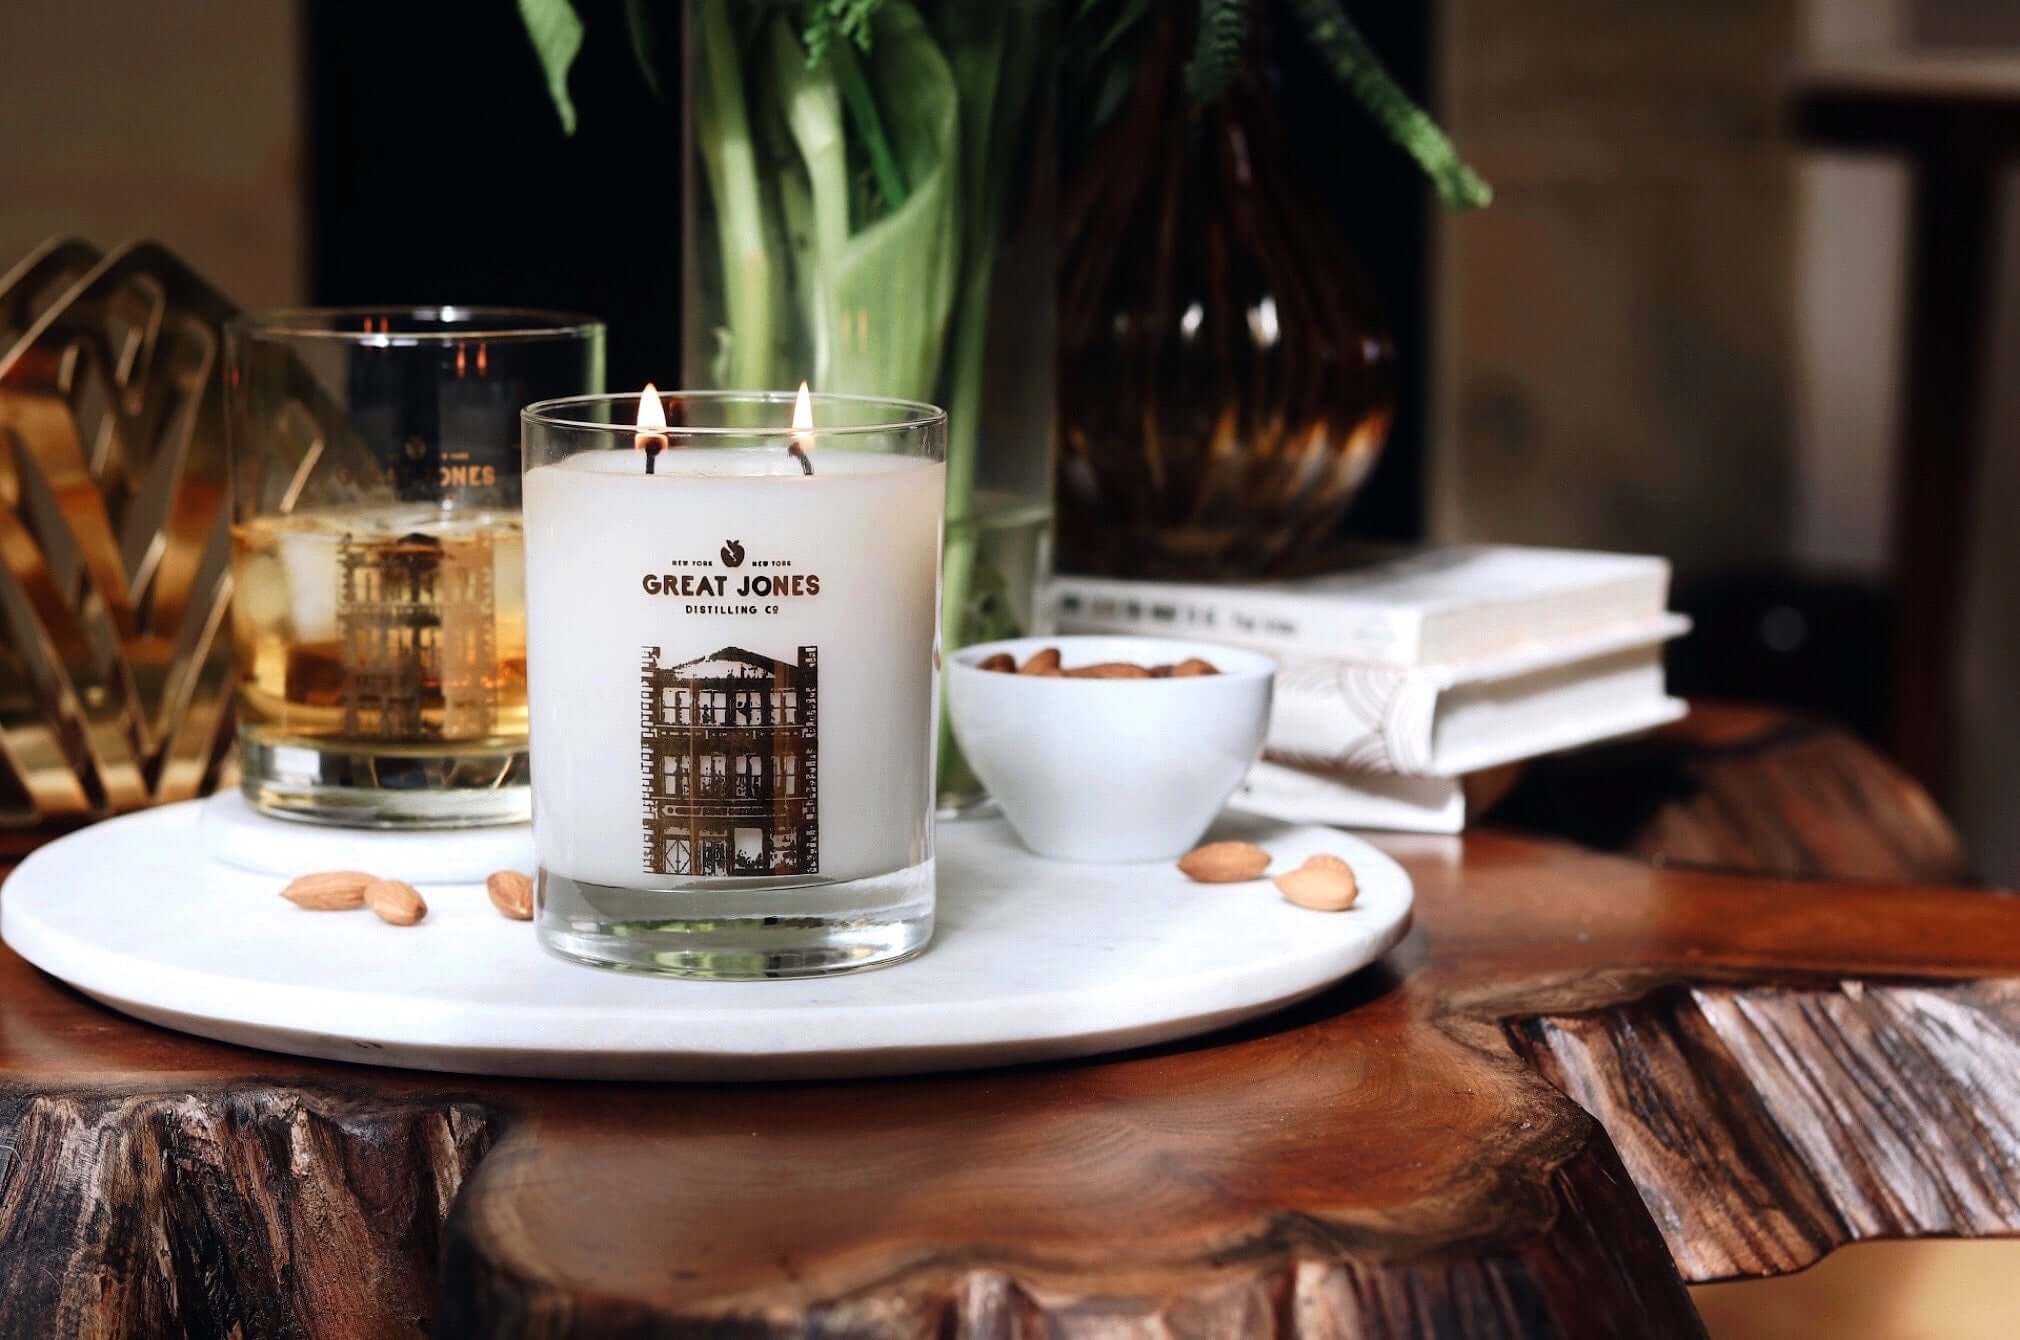 PRESS RELEASE: The Harlem Candle Co. x Great Jones Collaboration